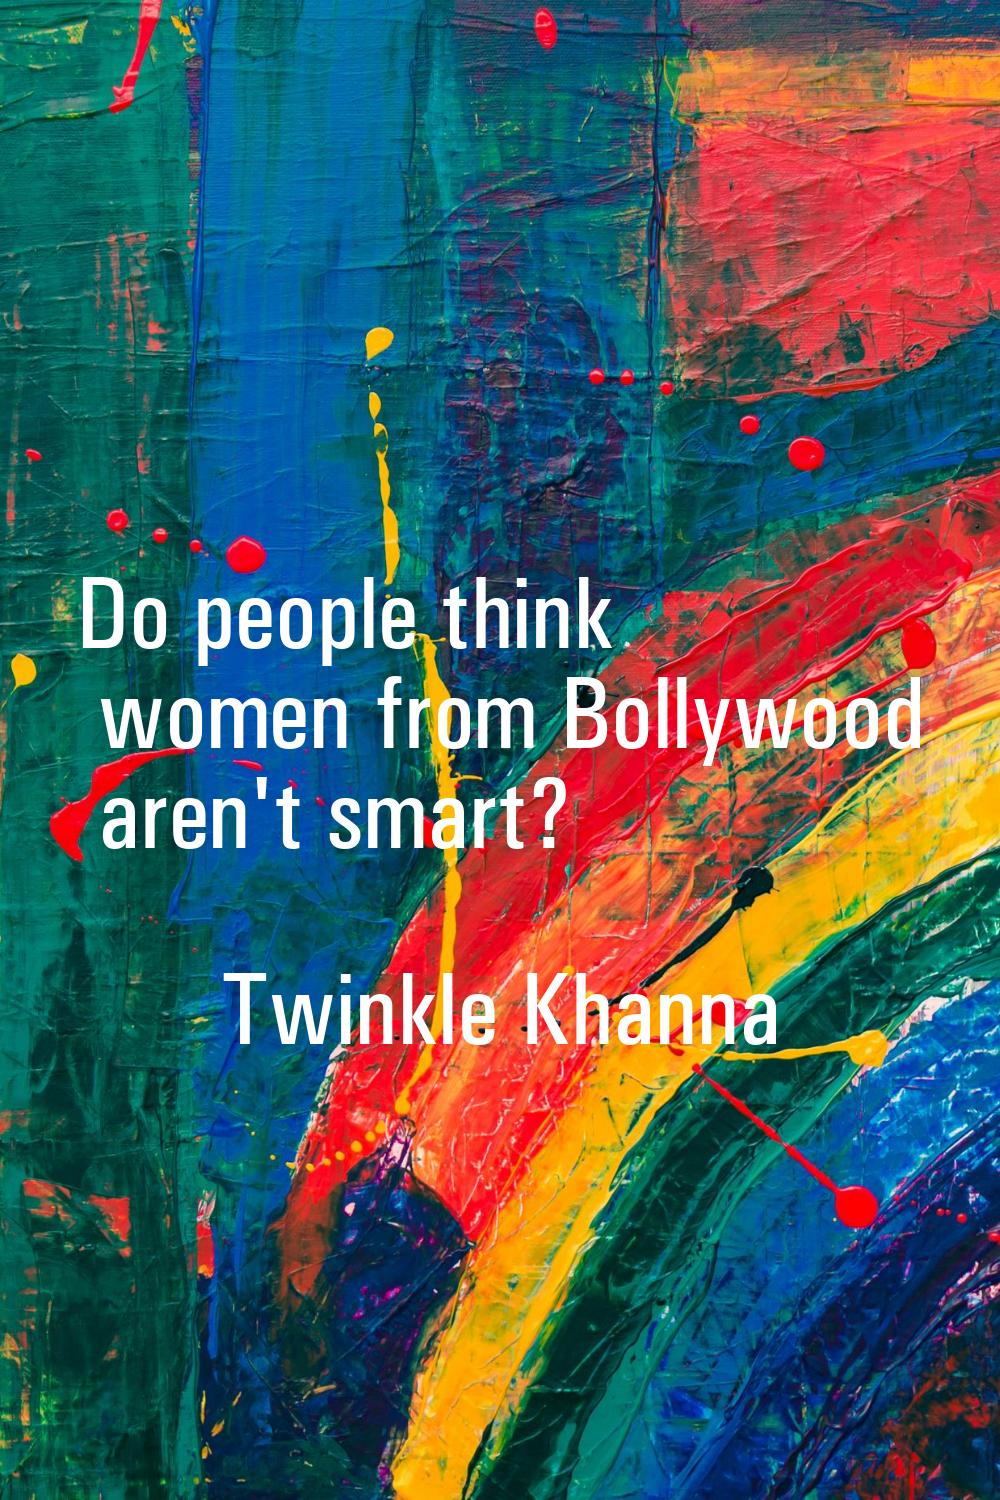 Do people think women from Bollywood aren't smart?